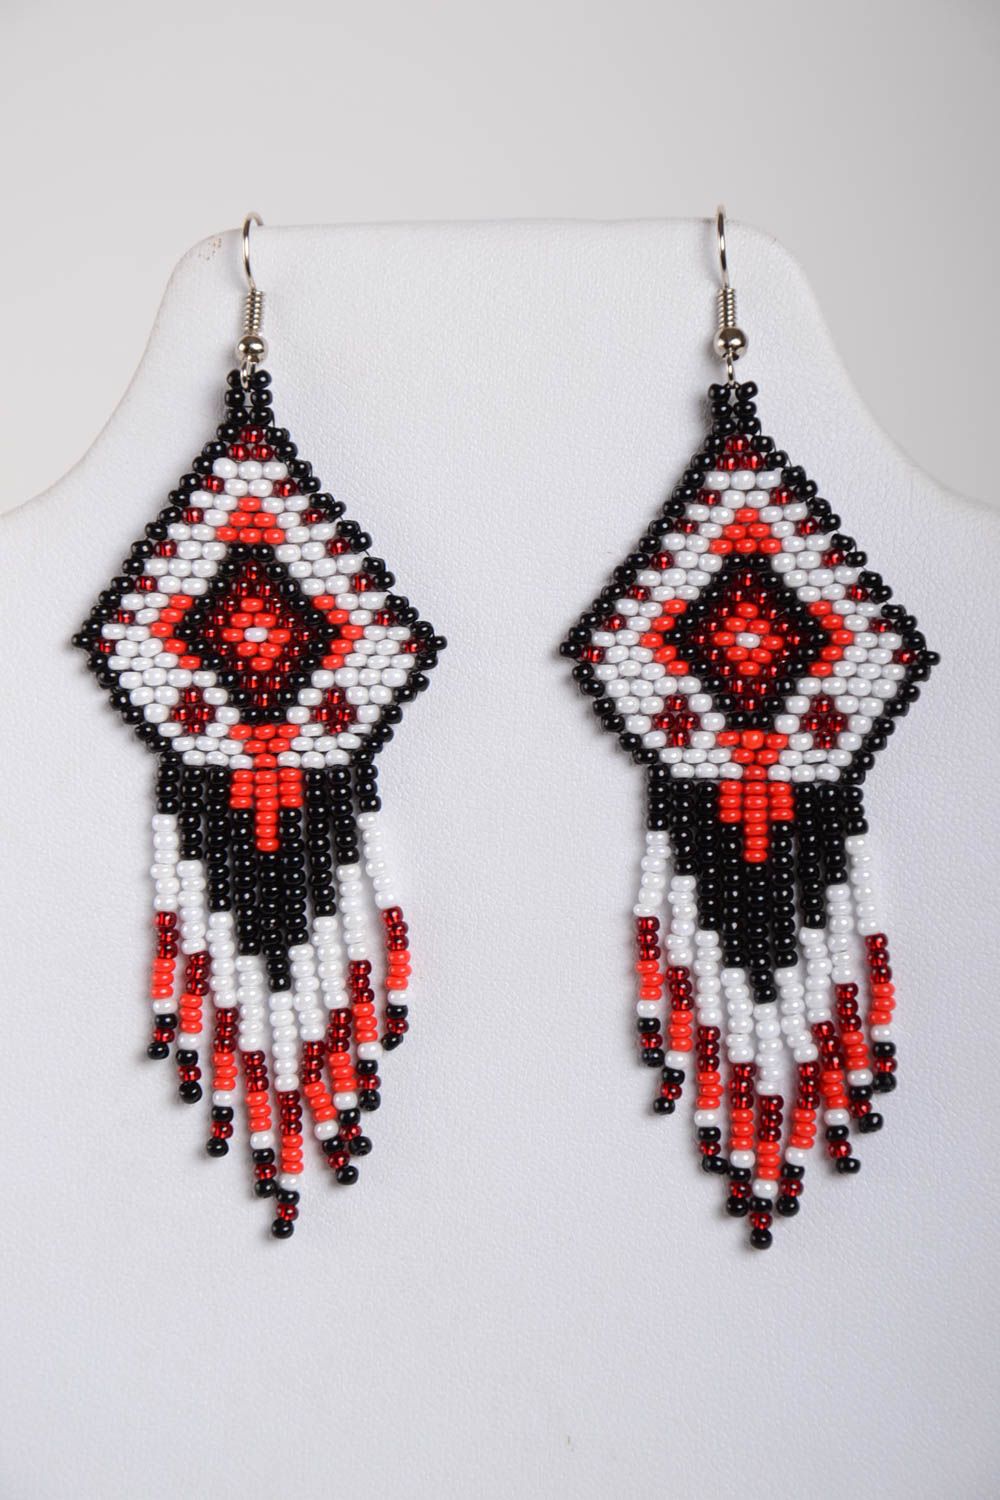 Long beaded earrings accessory in ethnic style cute earrings with charms photo 2